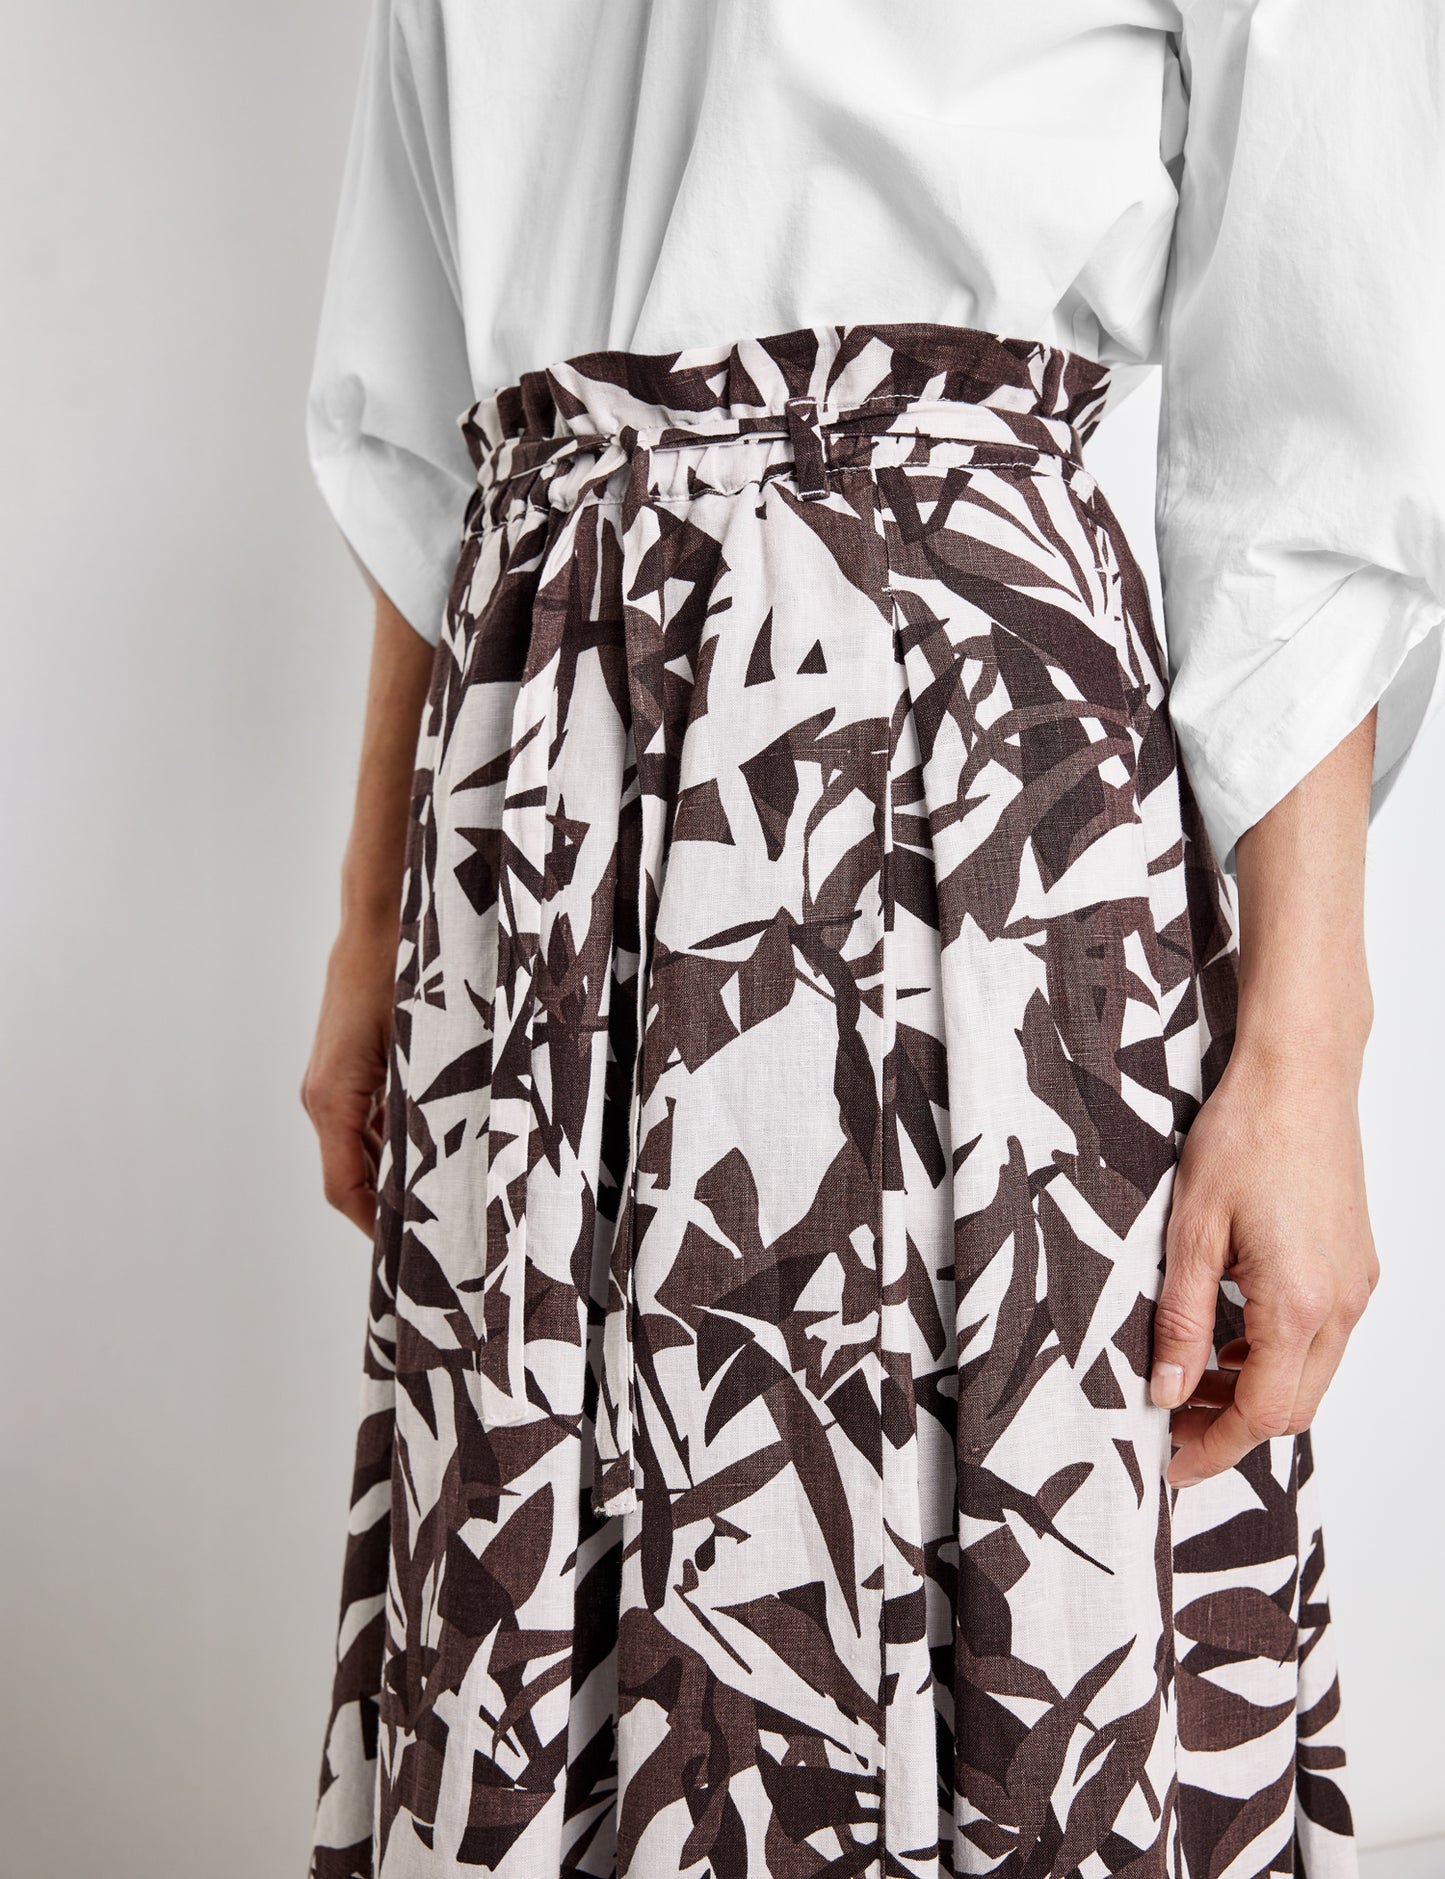 Linen skirt with a floral pattern